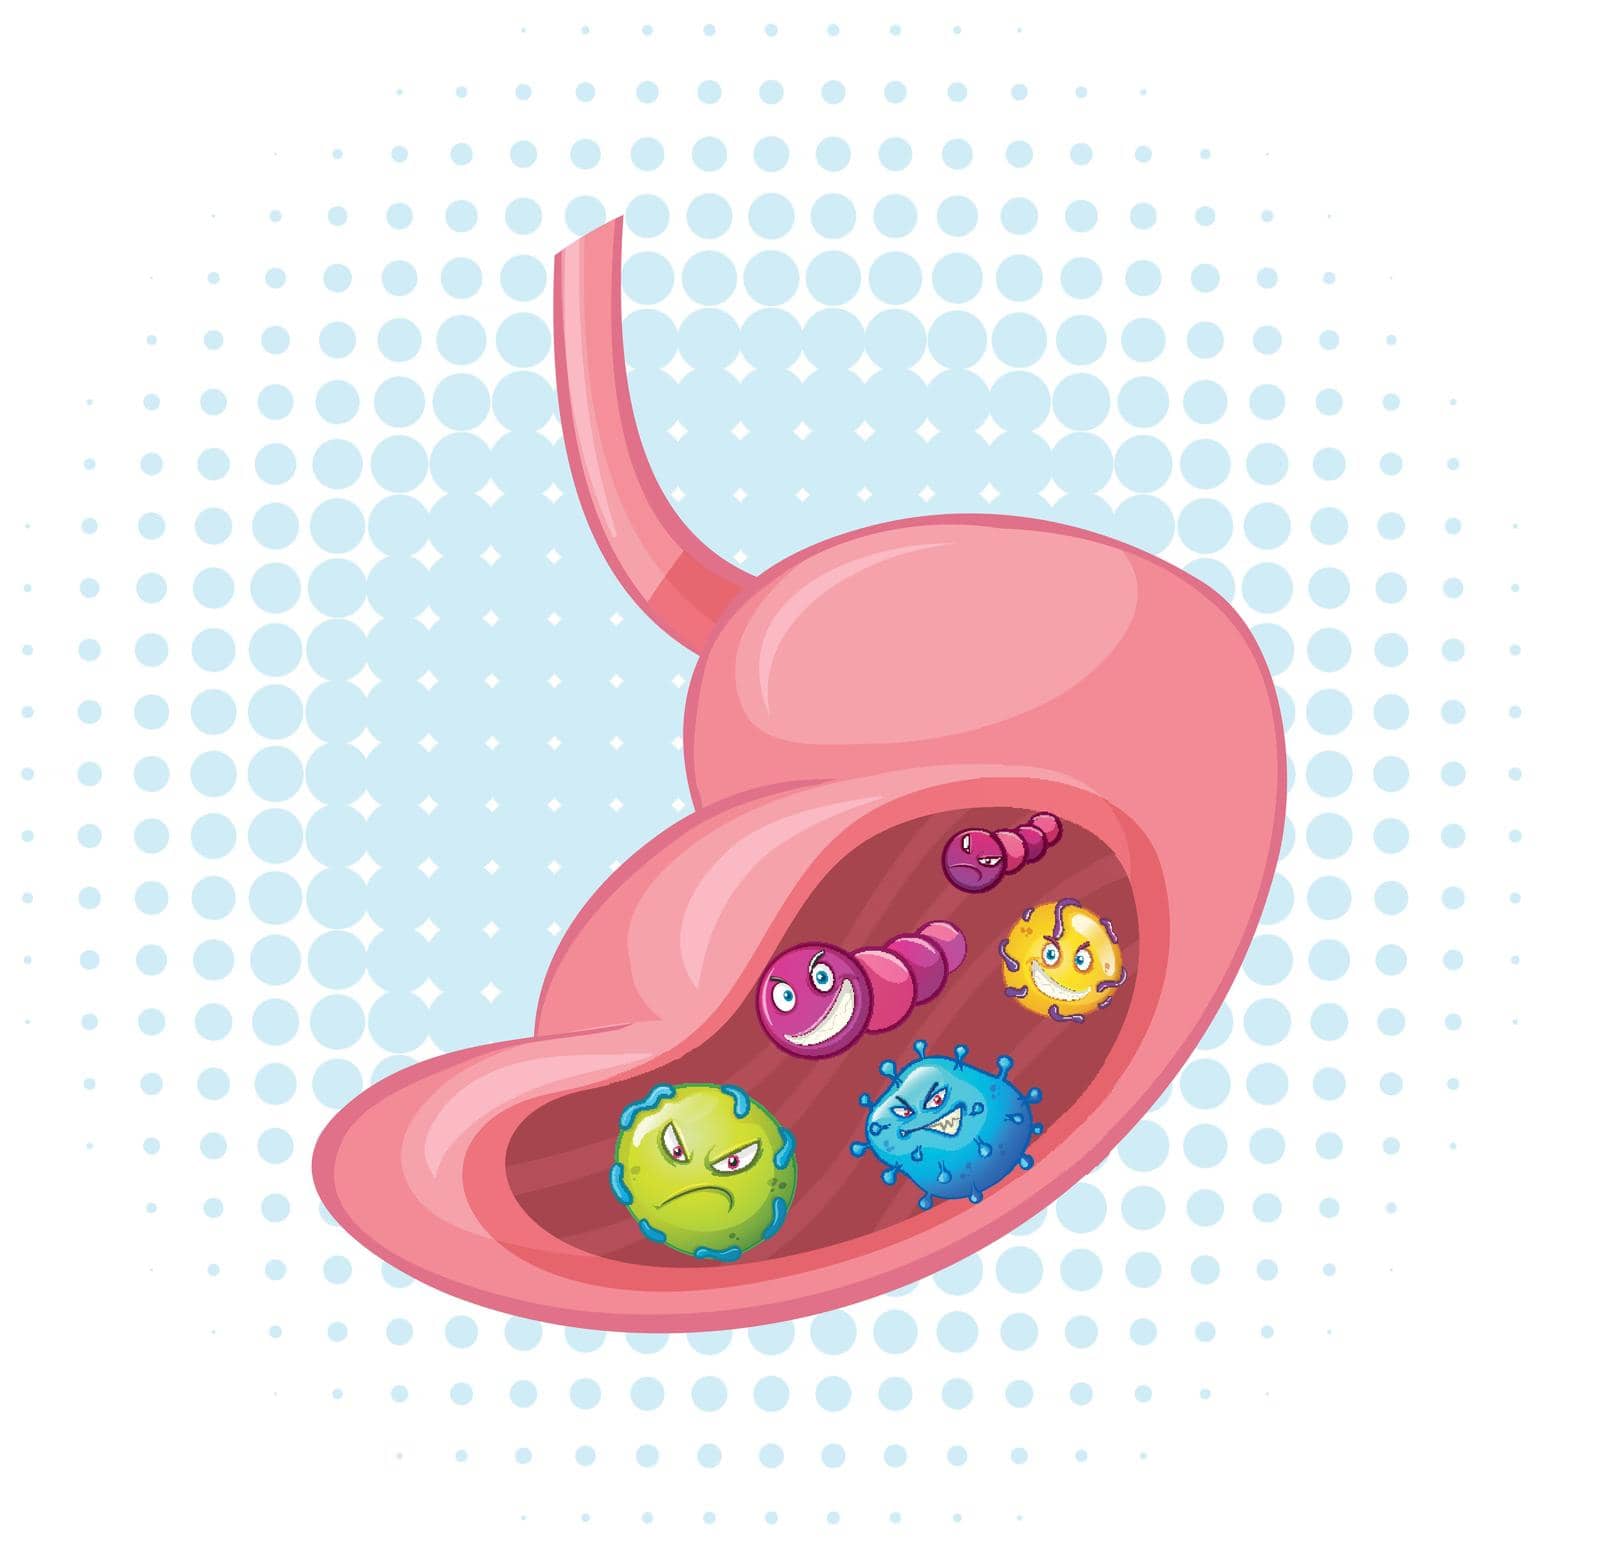 Bacteria in human stomach illustration